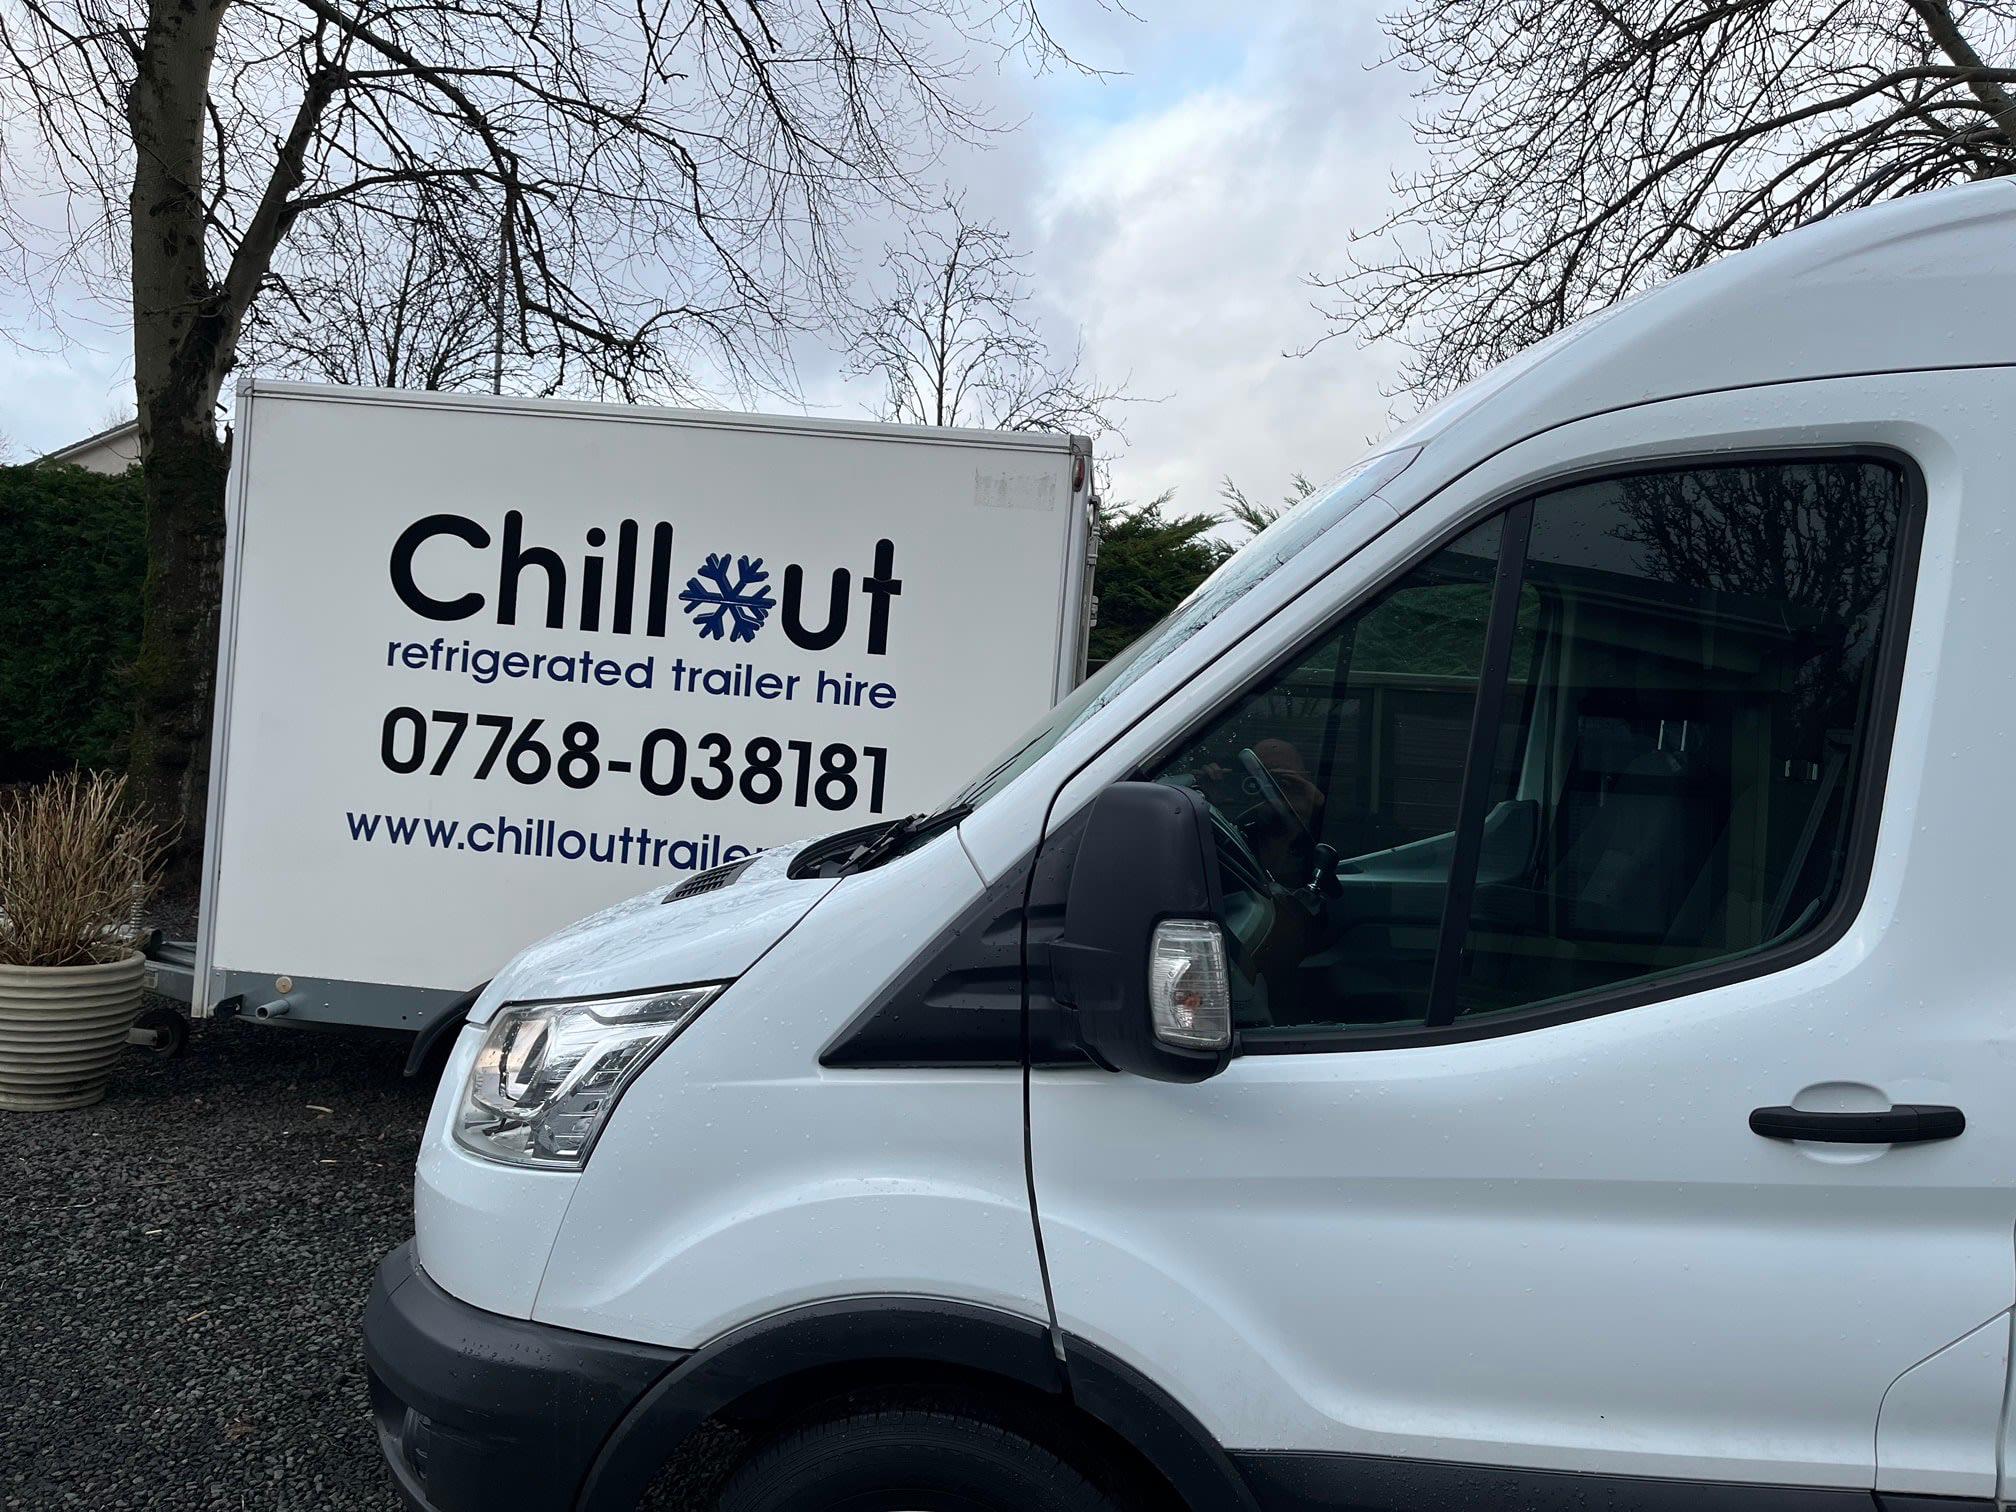 Chillout Ice Delivery Glasgow 07768 038181